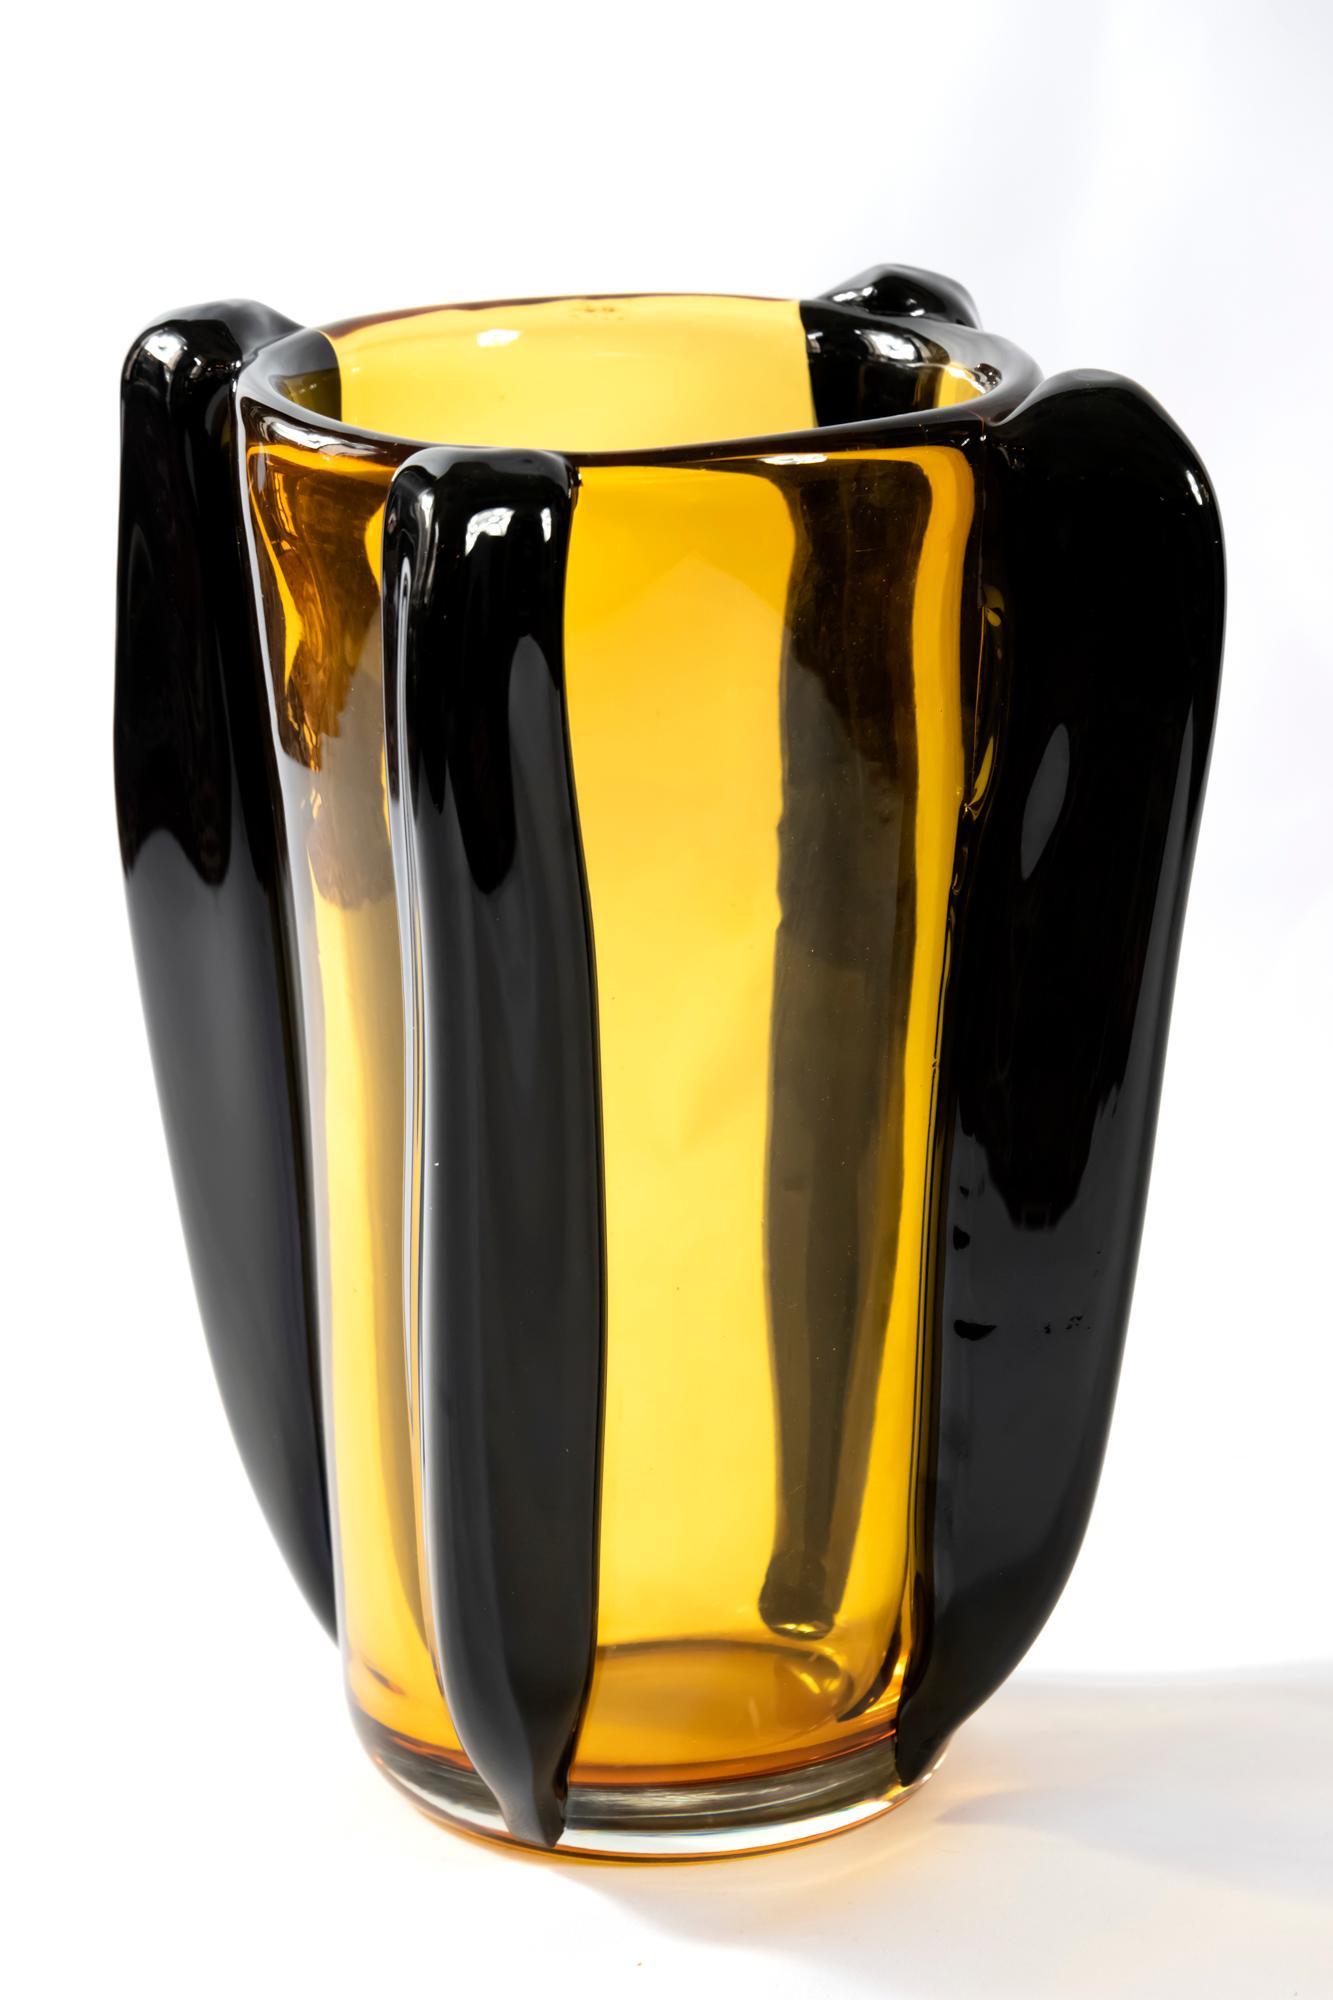 Italian vase is handmade of two color Murano glass.
The vase is very heavy and solid.
         